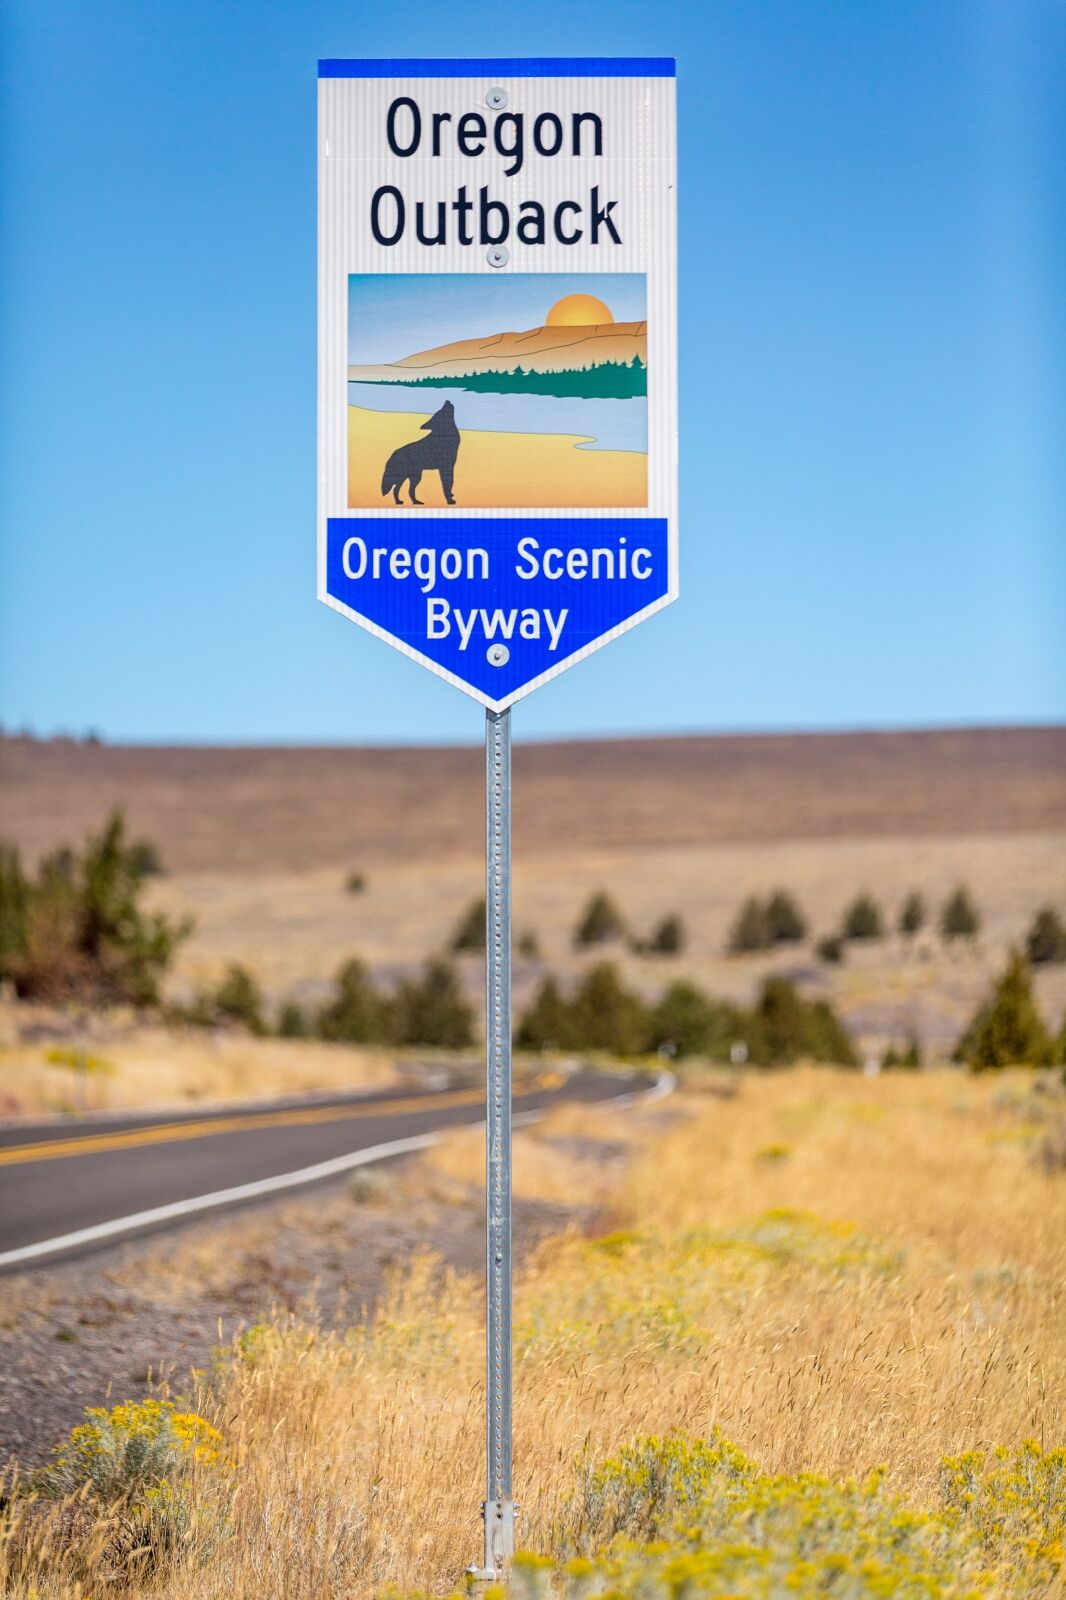 Oregon Scenic Byway sign by road in Oregon Outback